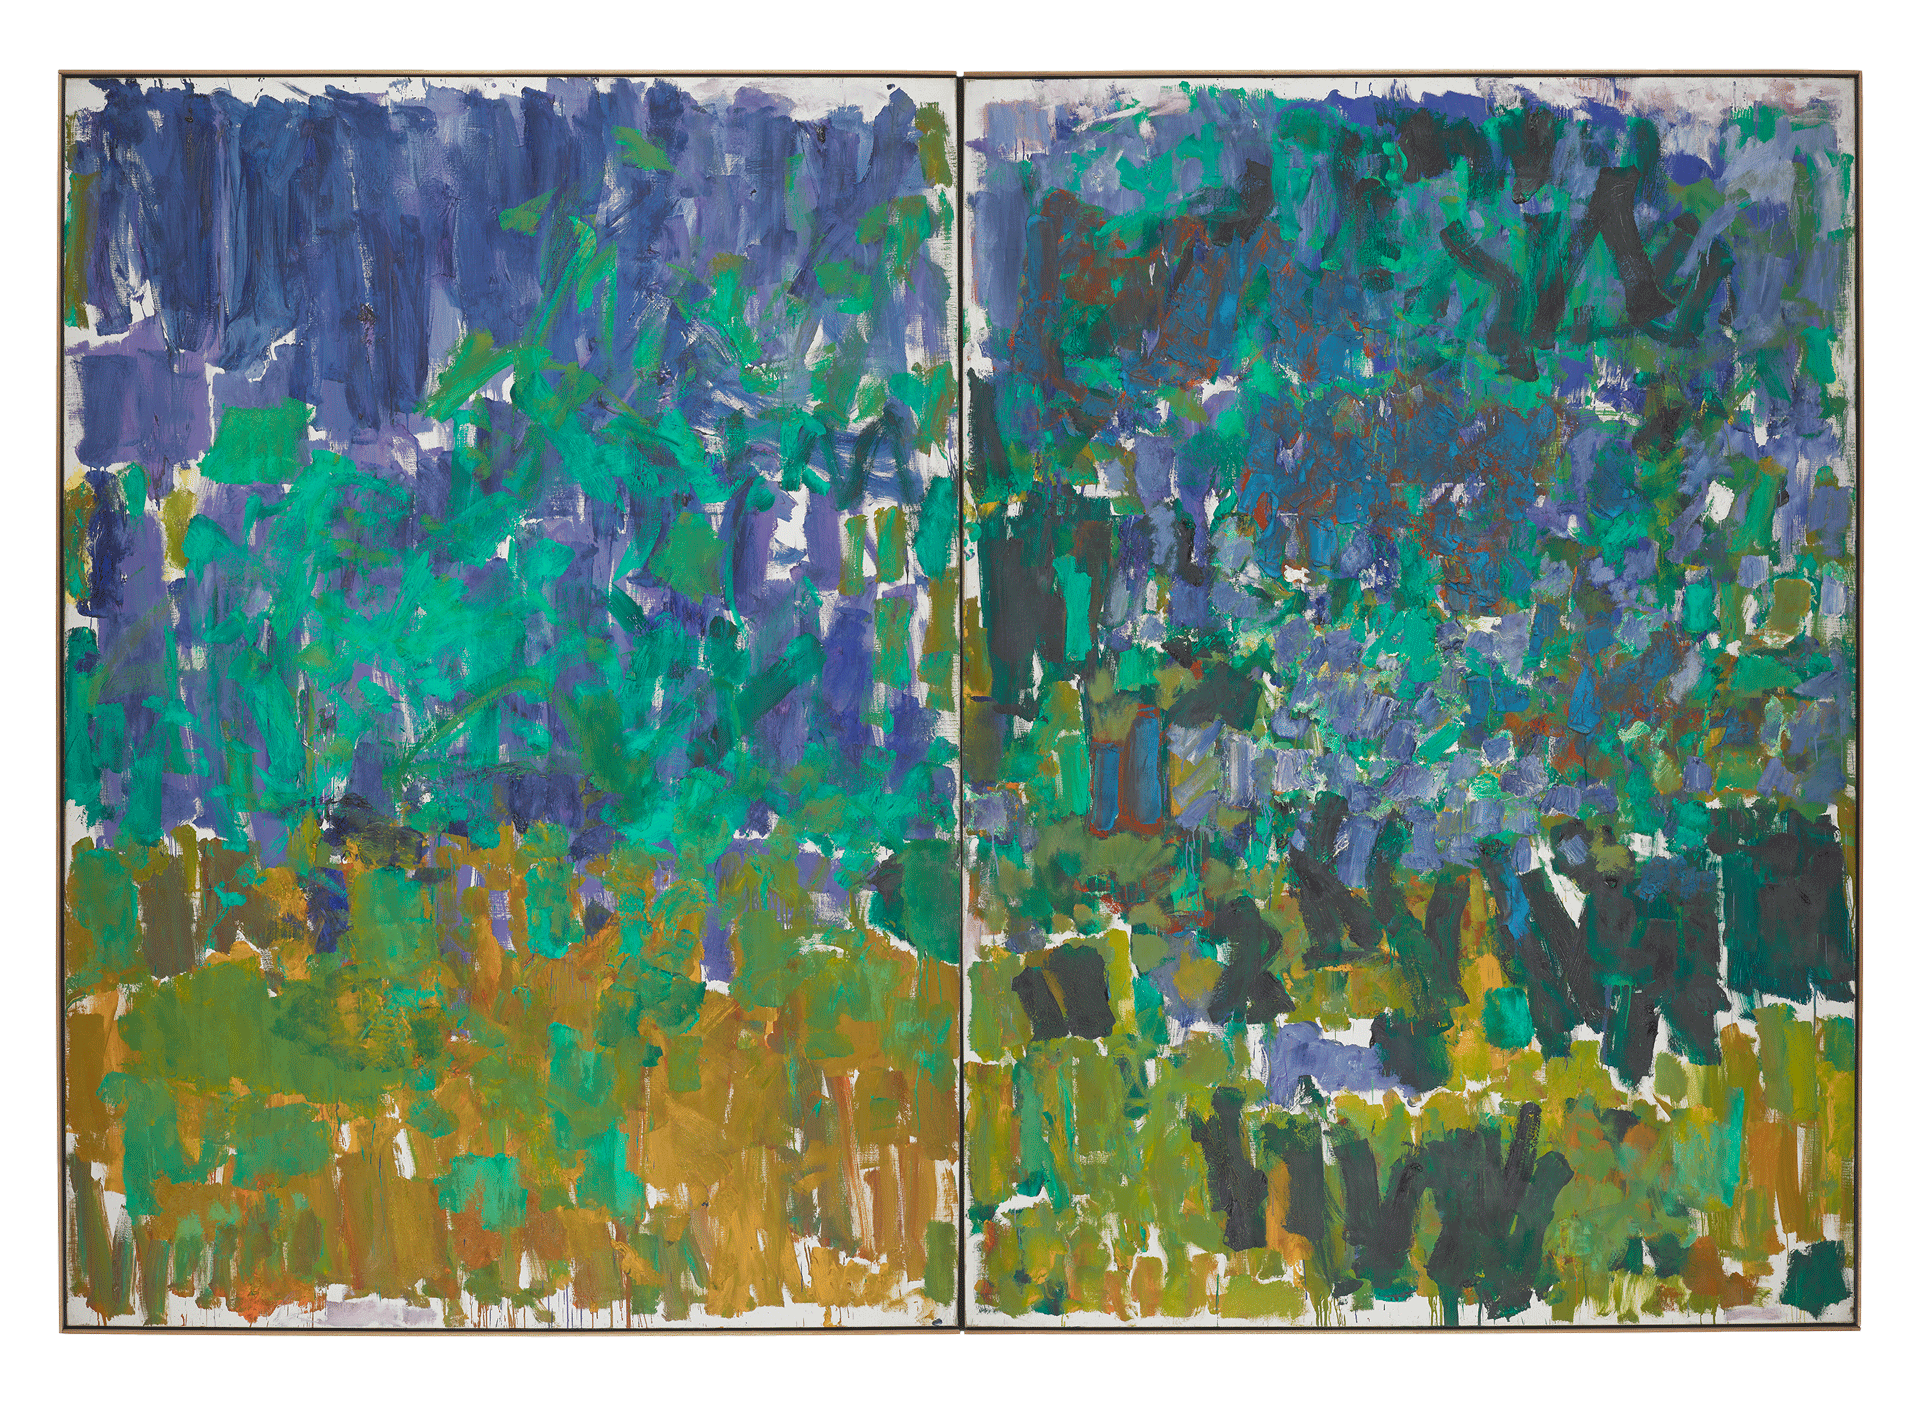 A painting by Joan Mitchell, titled Posted, dated 1977.